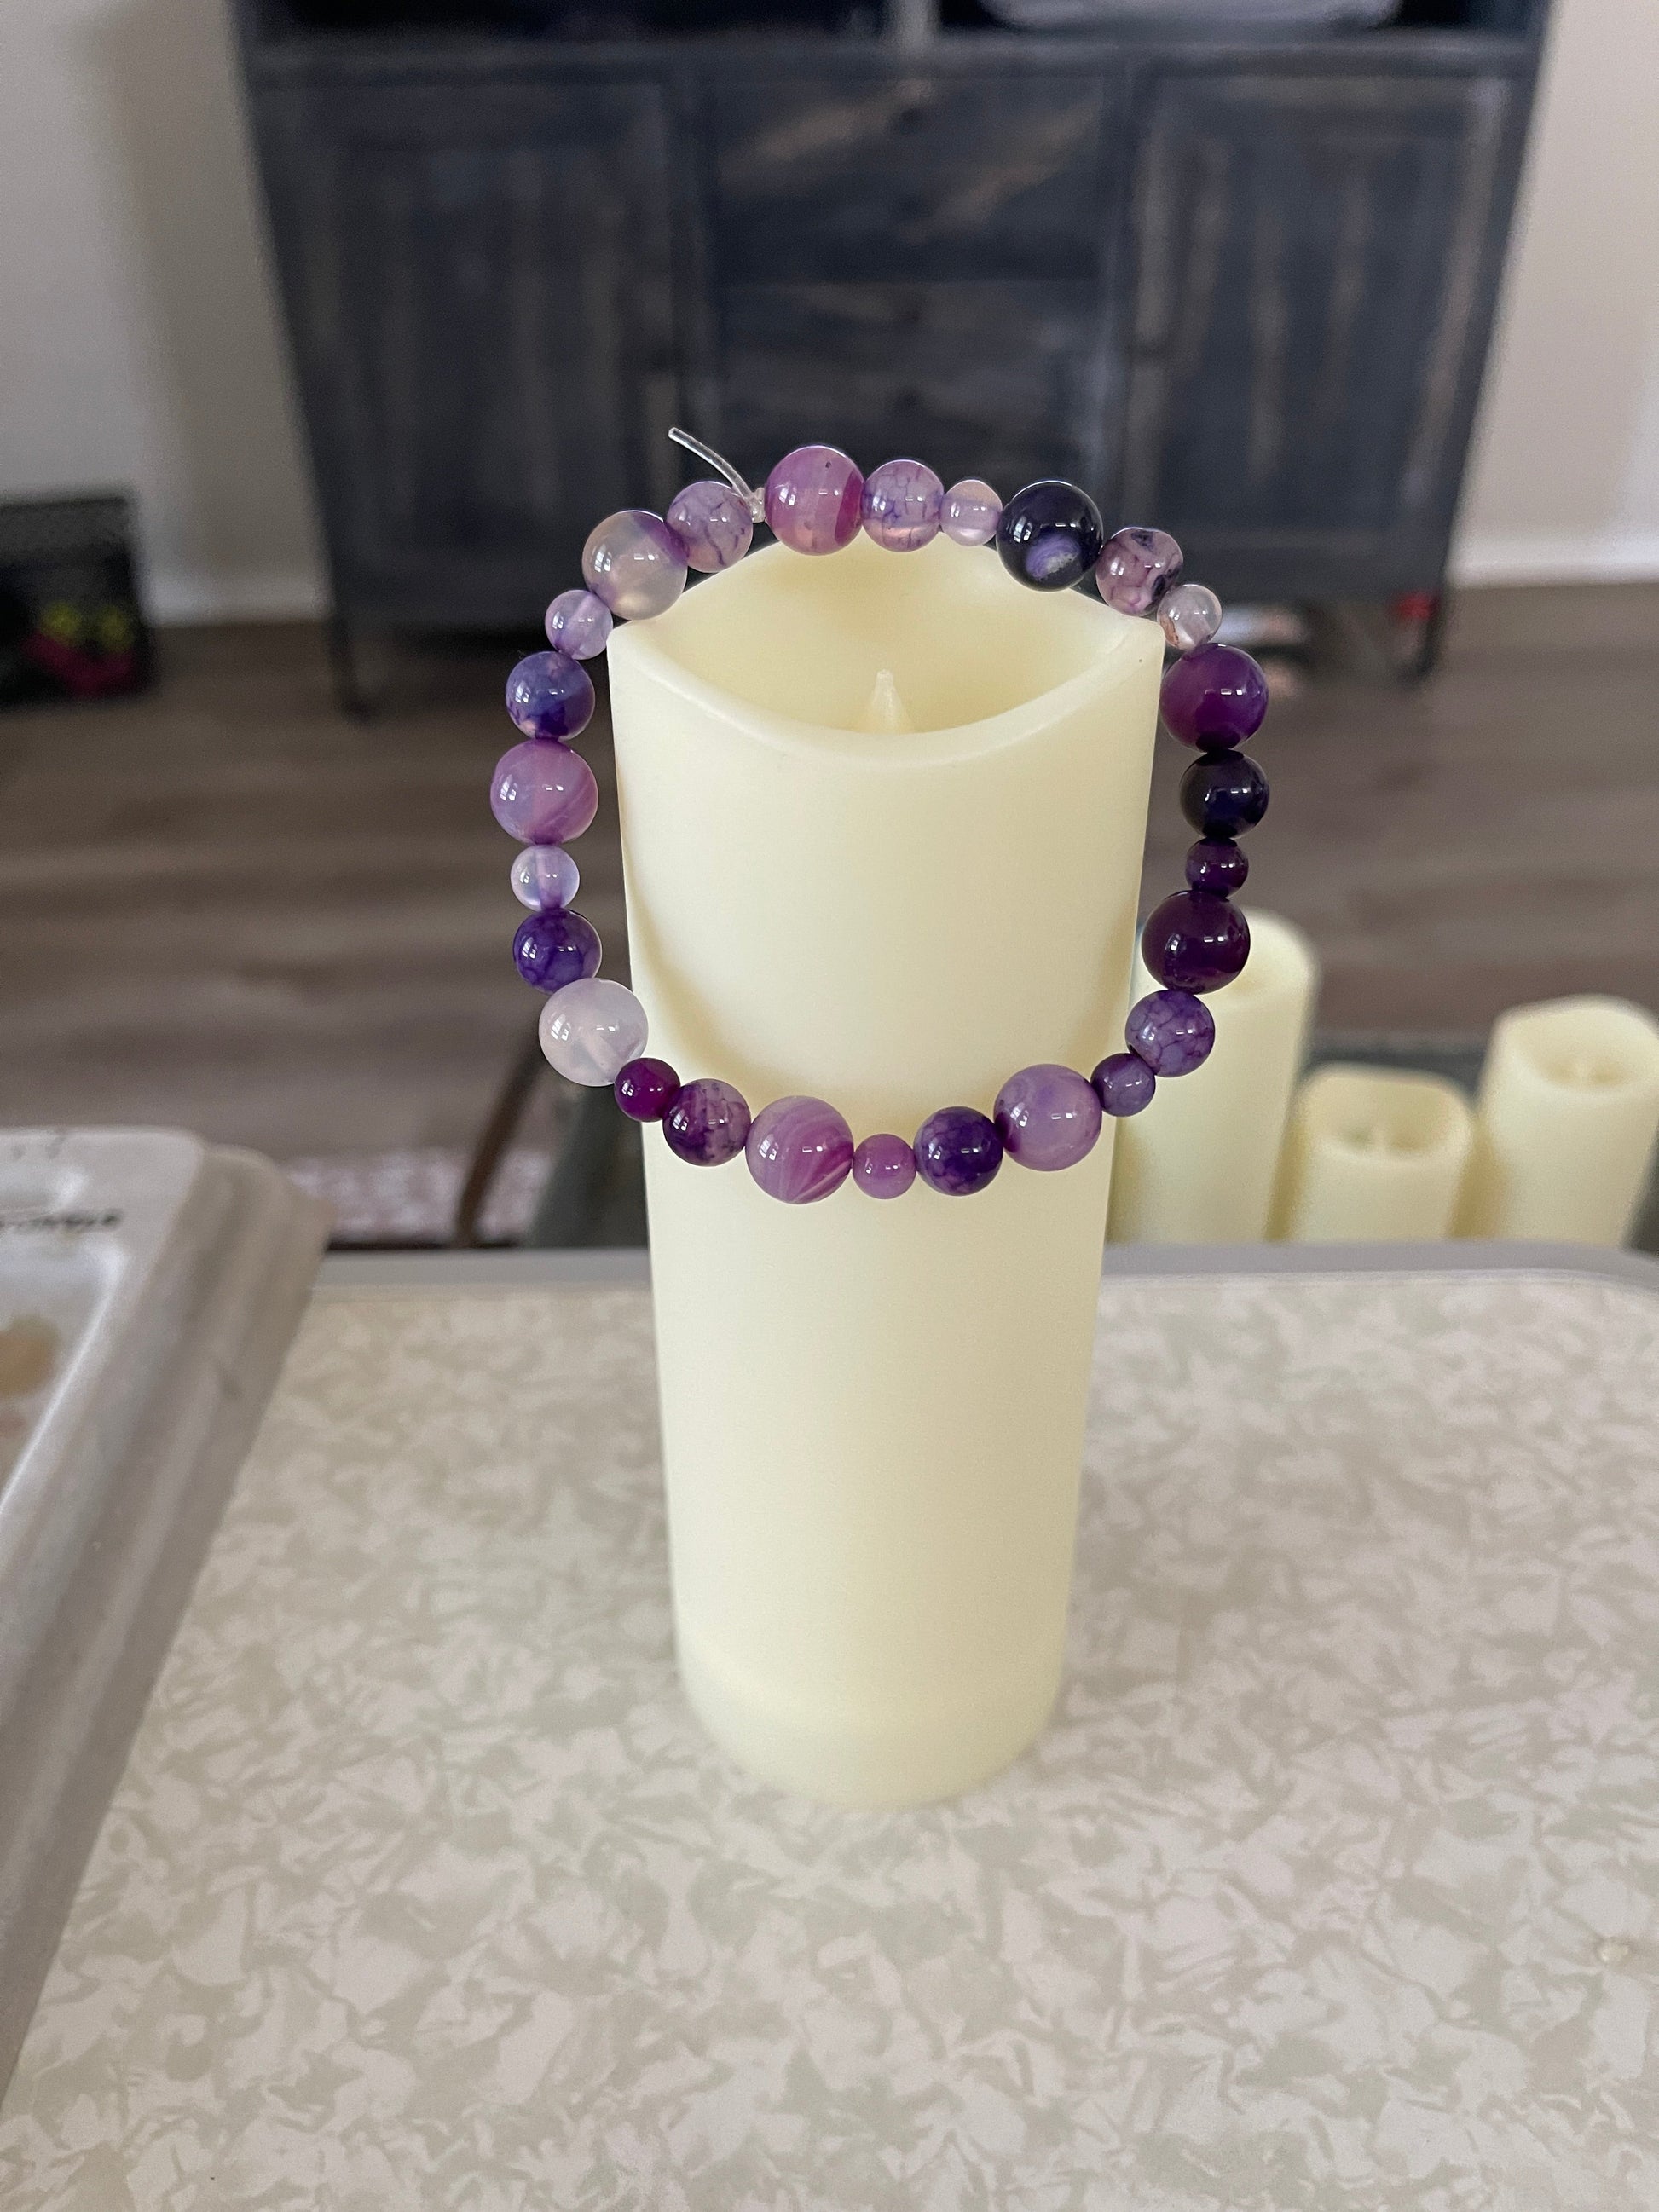 Purple Dyed Round Agate Beaded Elastic/Stretch BraceletPink tiful of LOVE